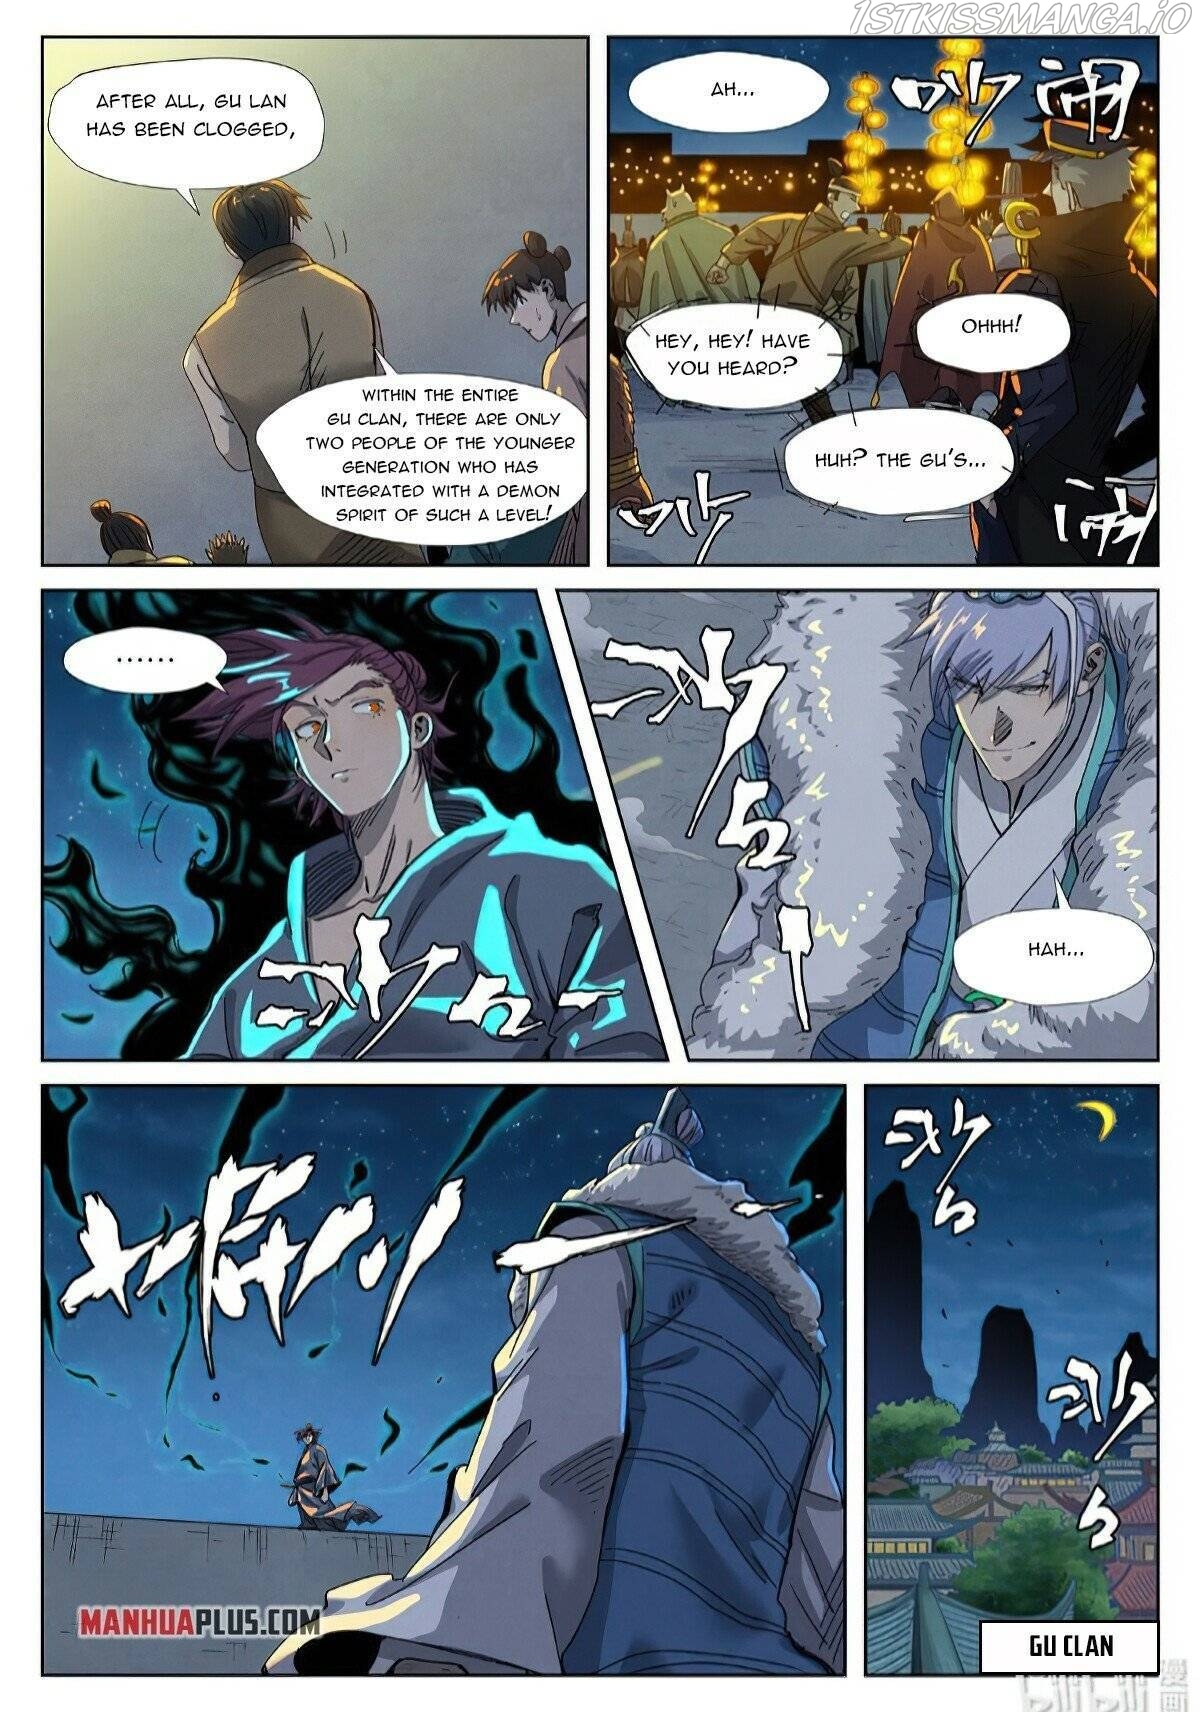 Tales of Demons and Gods Manhua Chapter 350.5 - Page 5